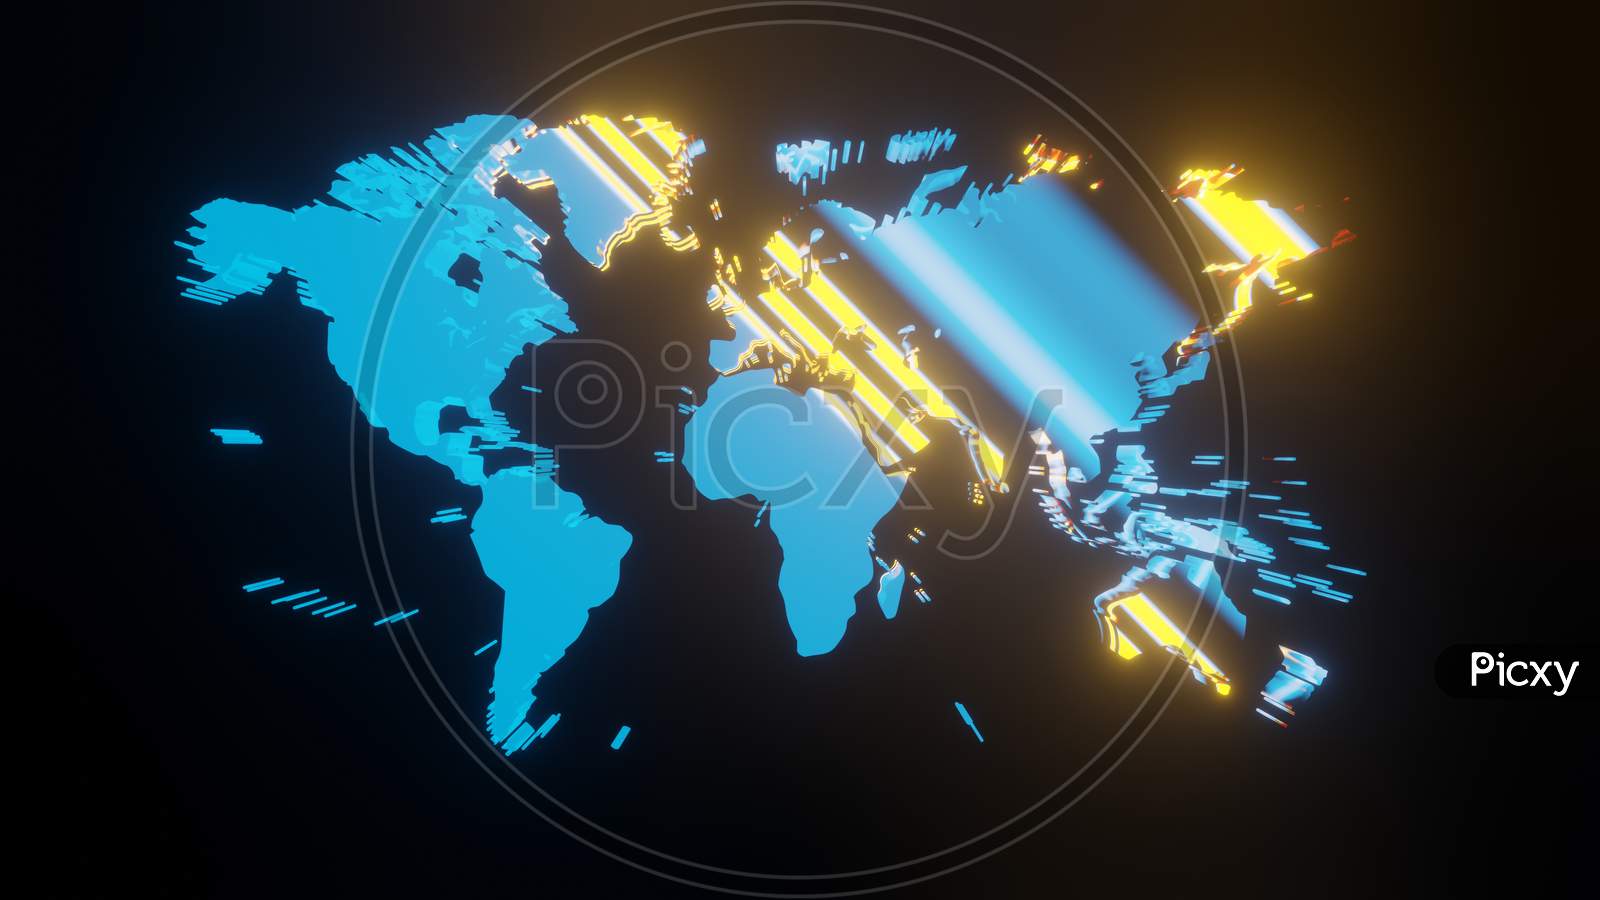 Illustration Graphic Of Colorful Lining Texture Or Pattern Formation On The World Map, Isolated On Black Background. 3D Rendering Abstract Loop Neon Lighting Effect On World Map.